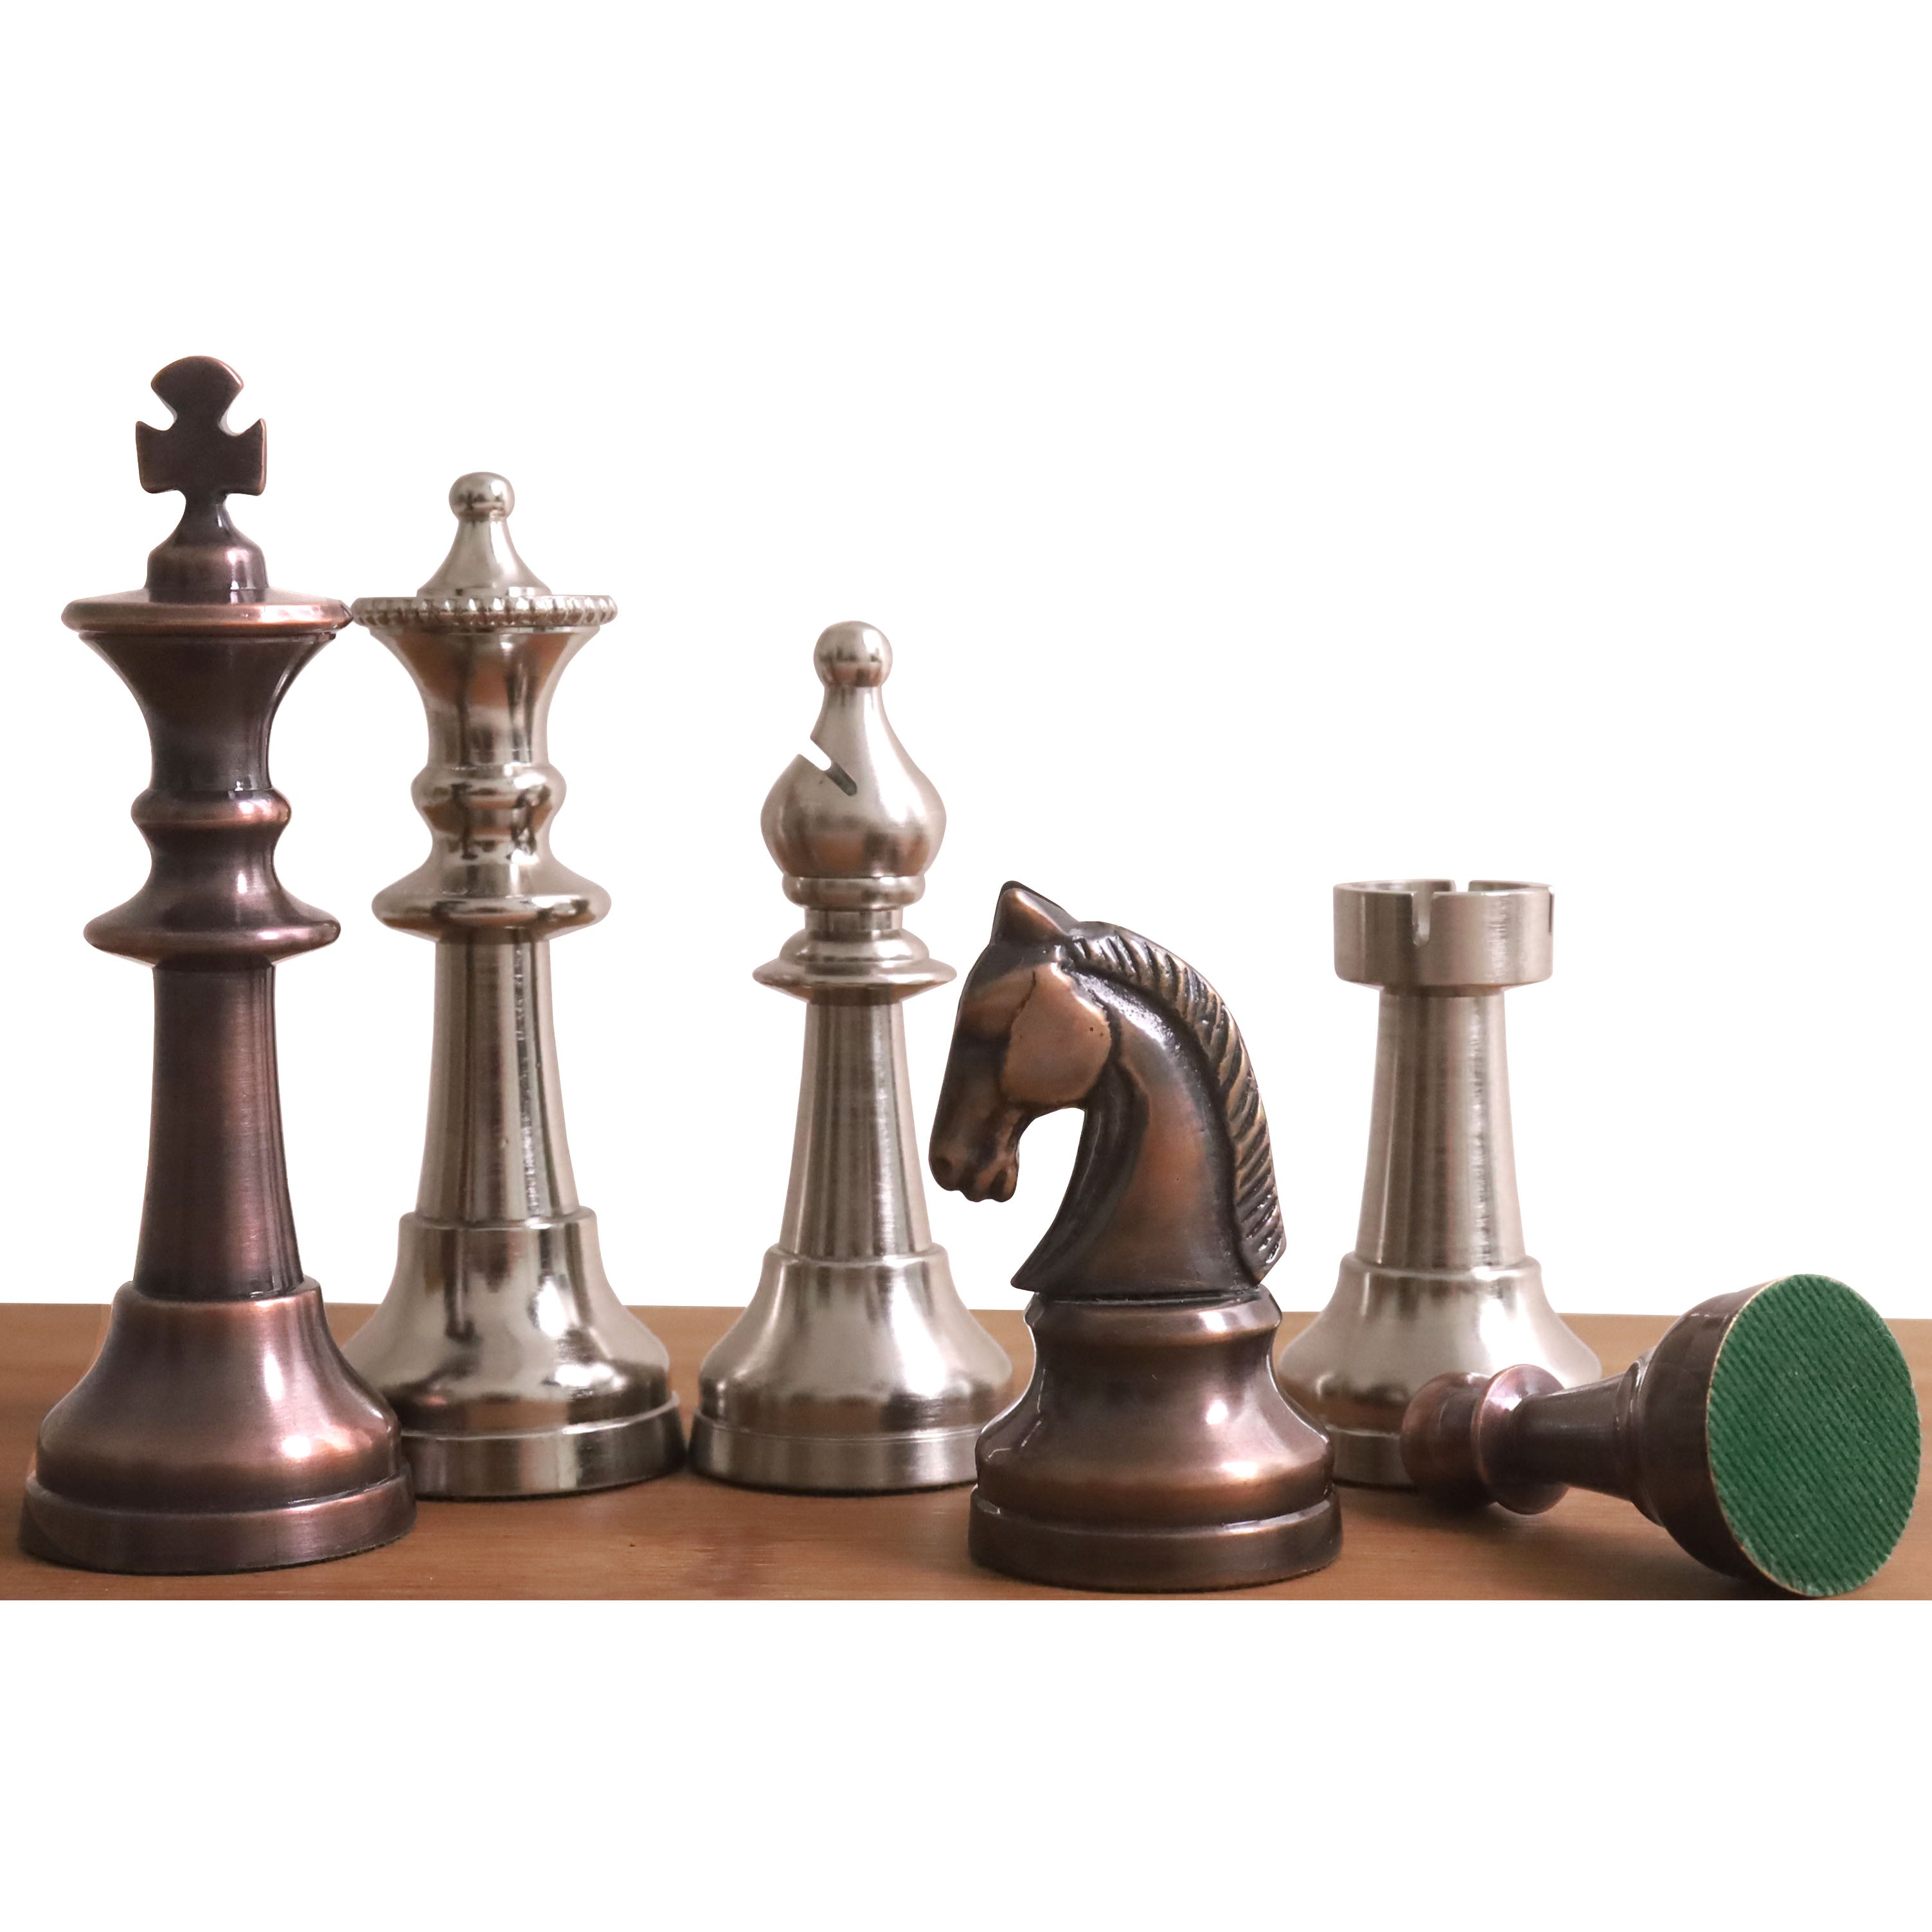 3.5" Elegance Series Brass Metal Luxury Chess Set - Pieces Only- Antiqued Copper